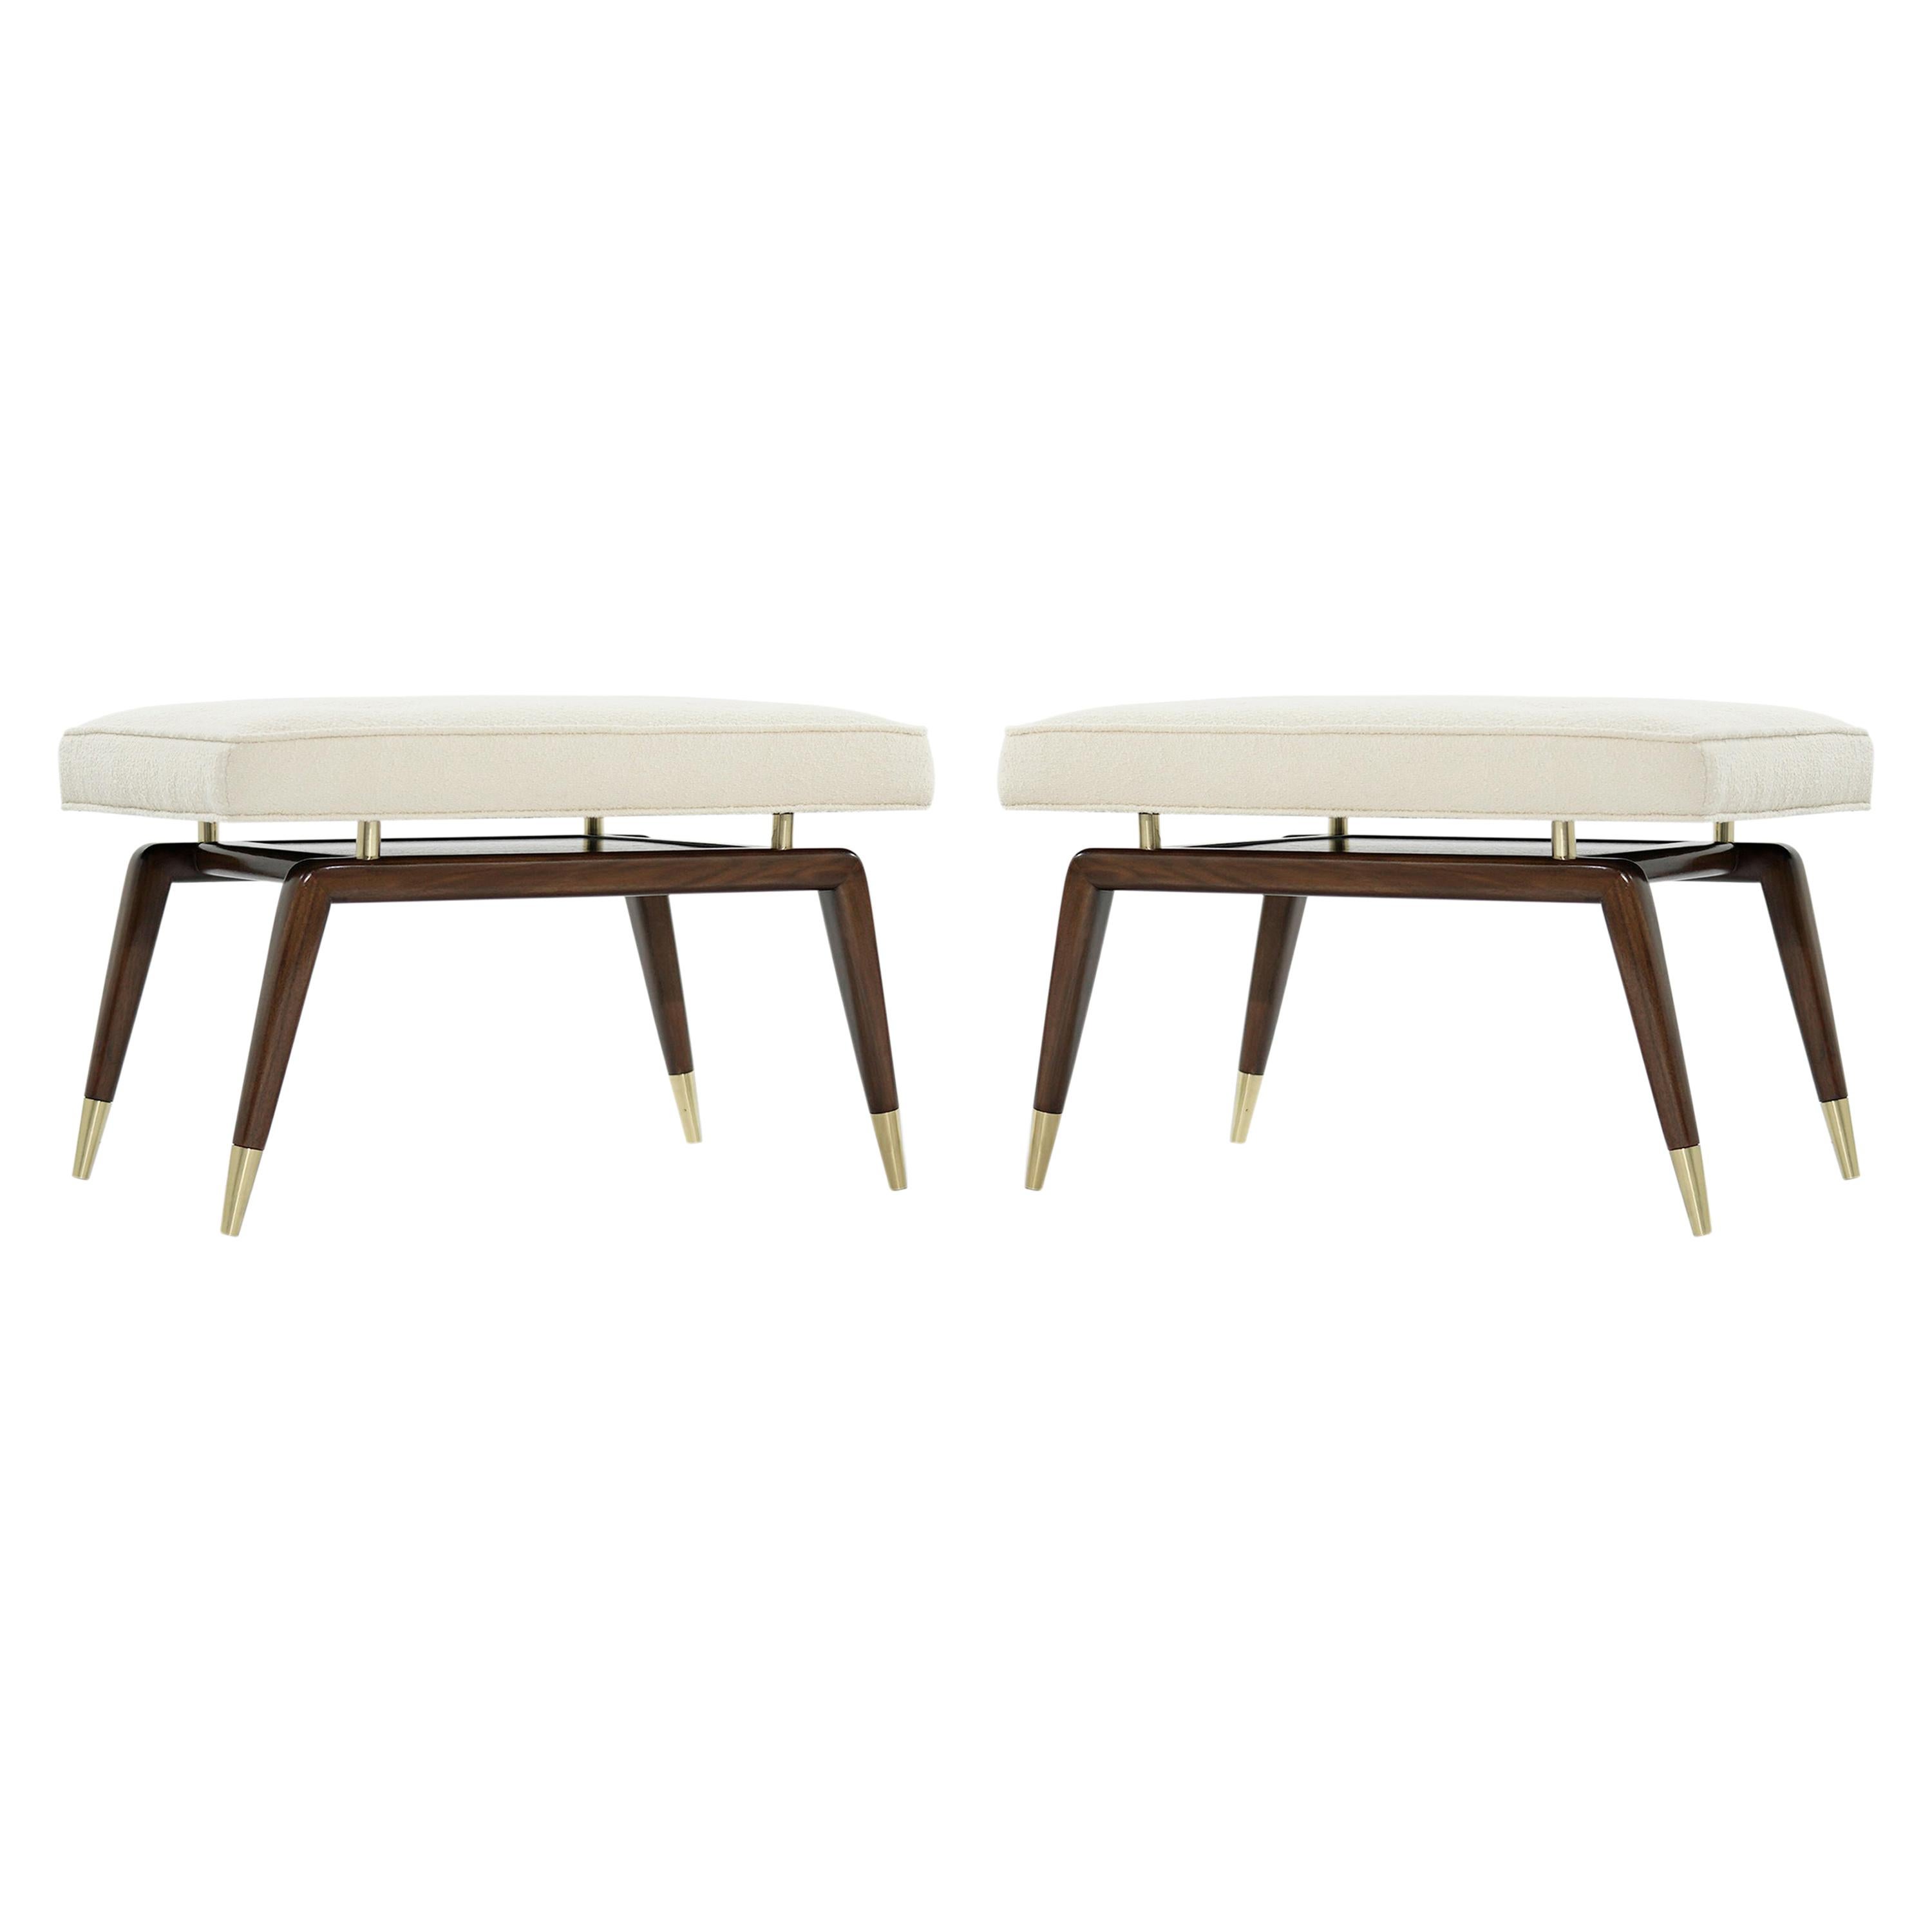 Set of Gio Walnut Benches in Bouclé